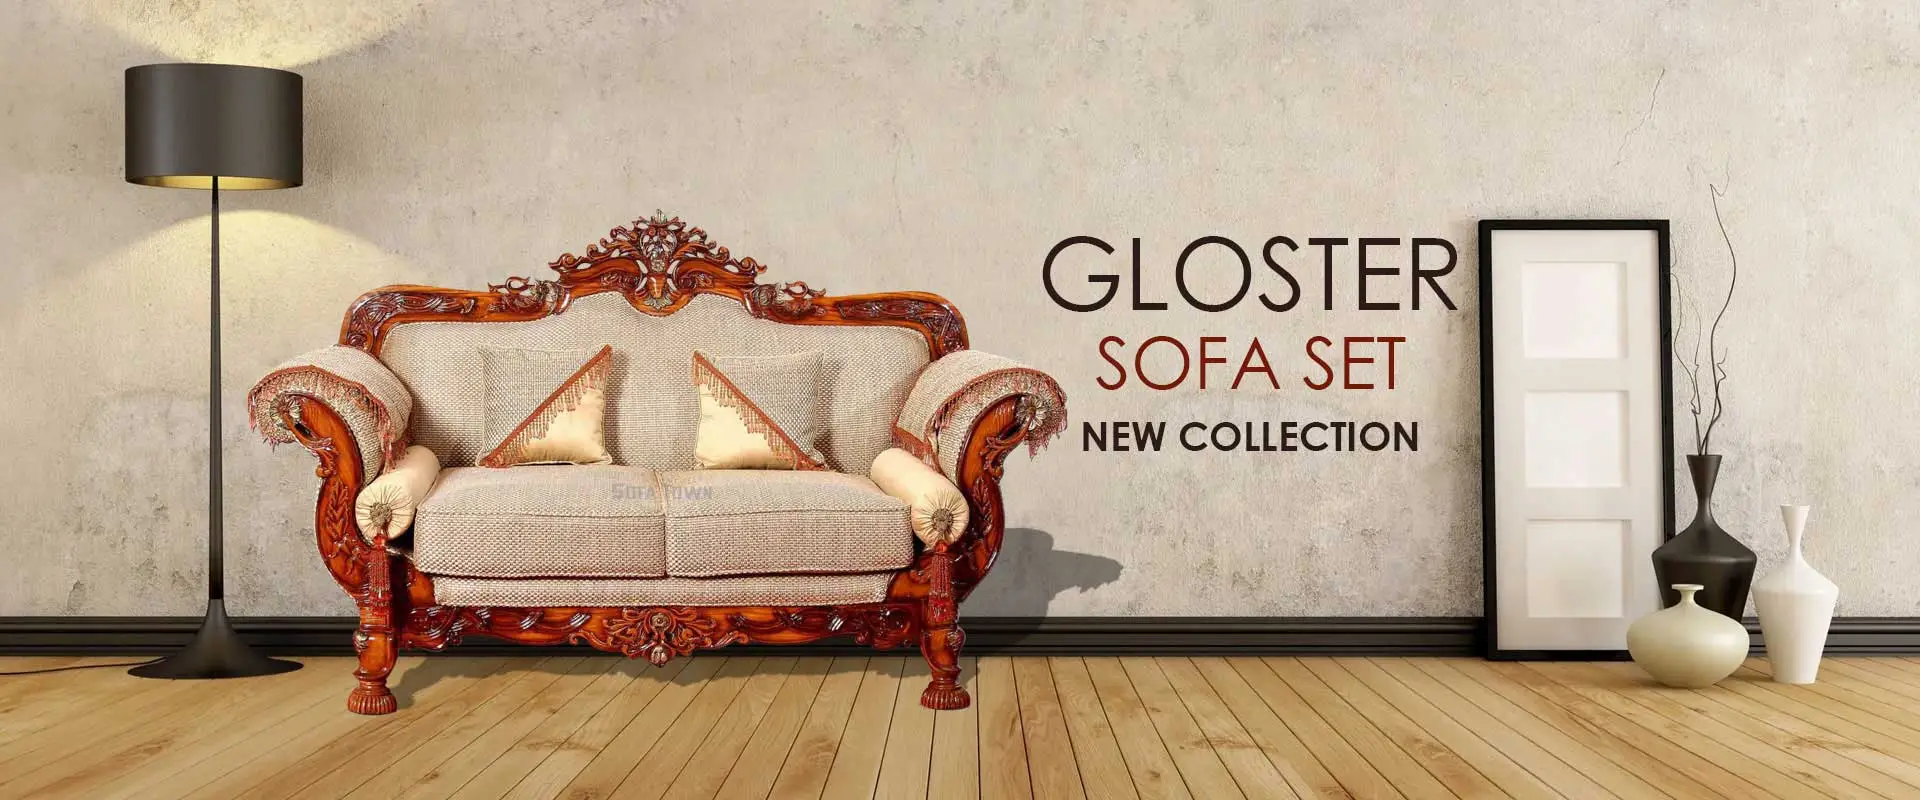 Gloster Sofa Set  Manufacturers in Jharkhand